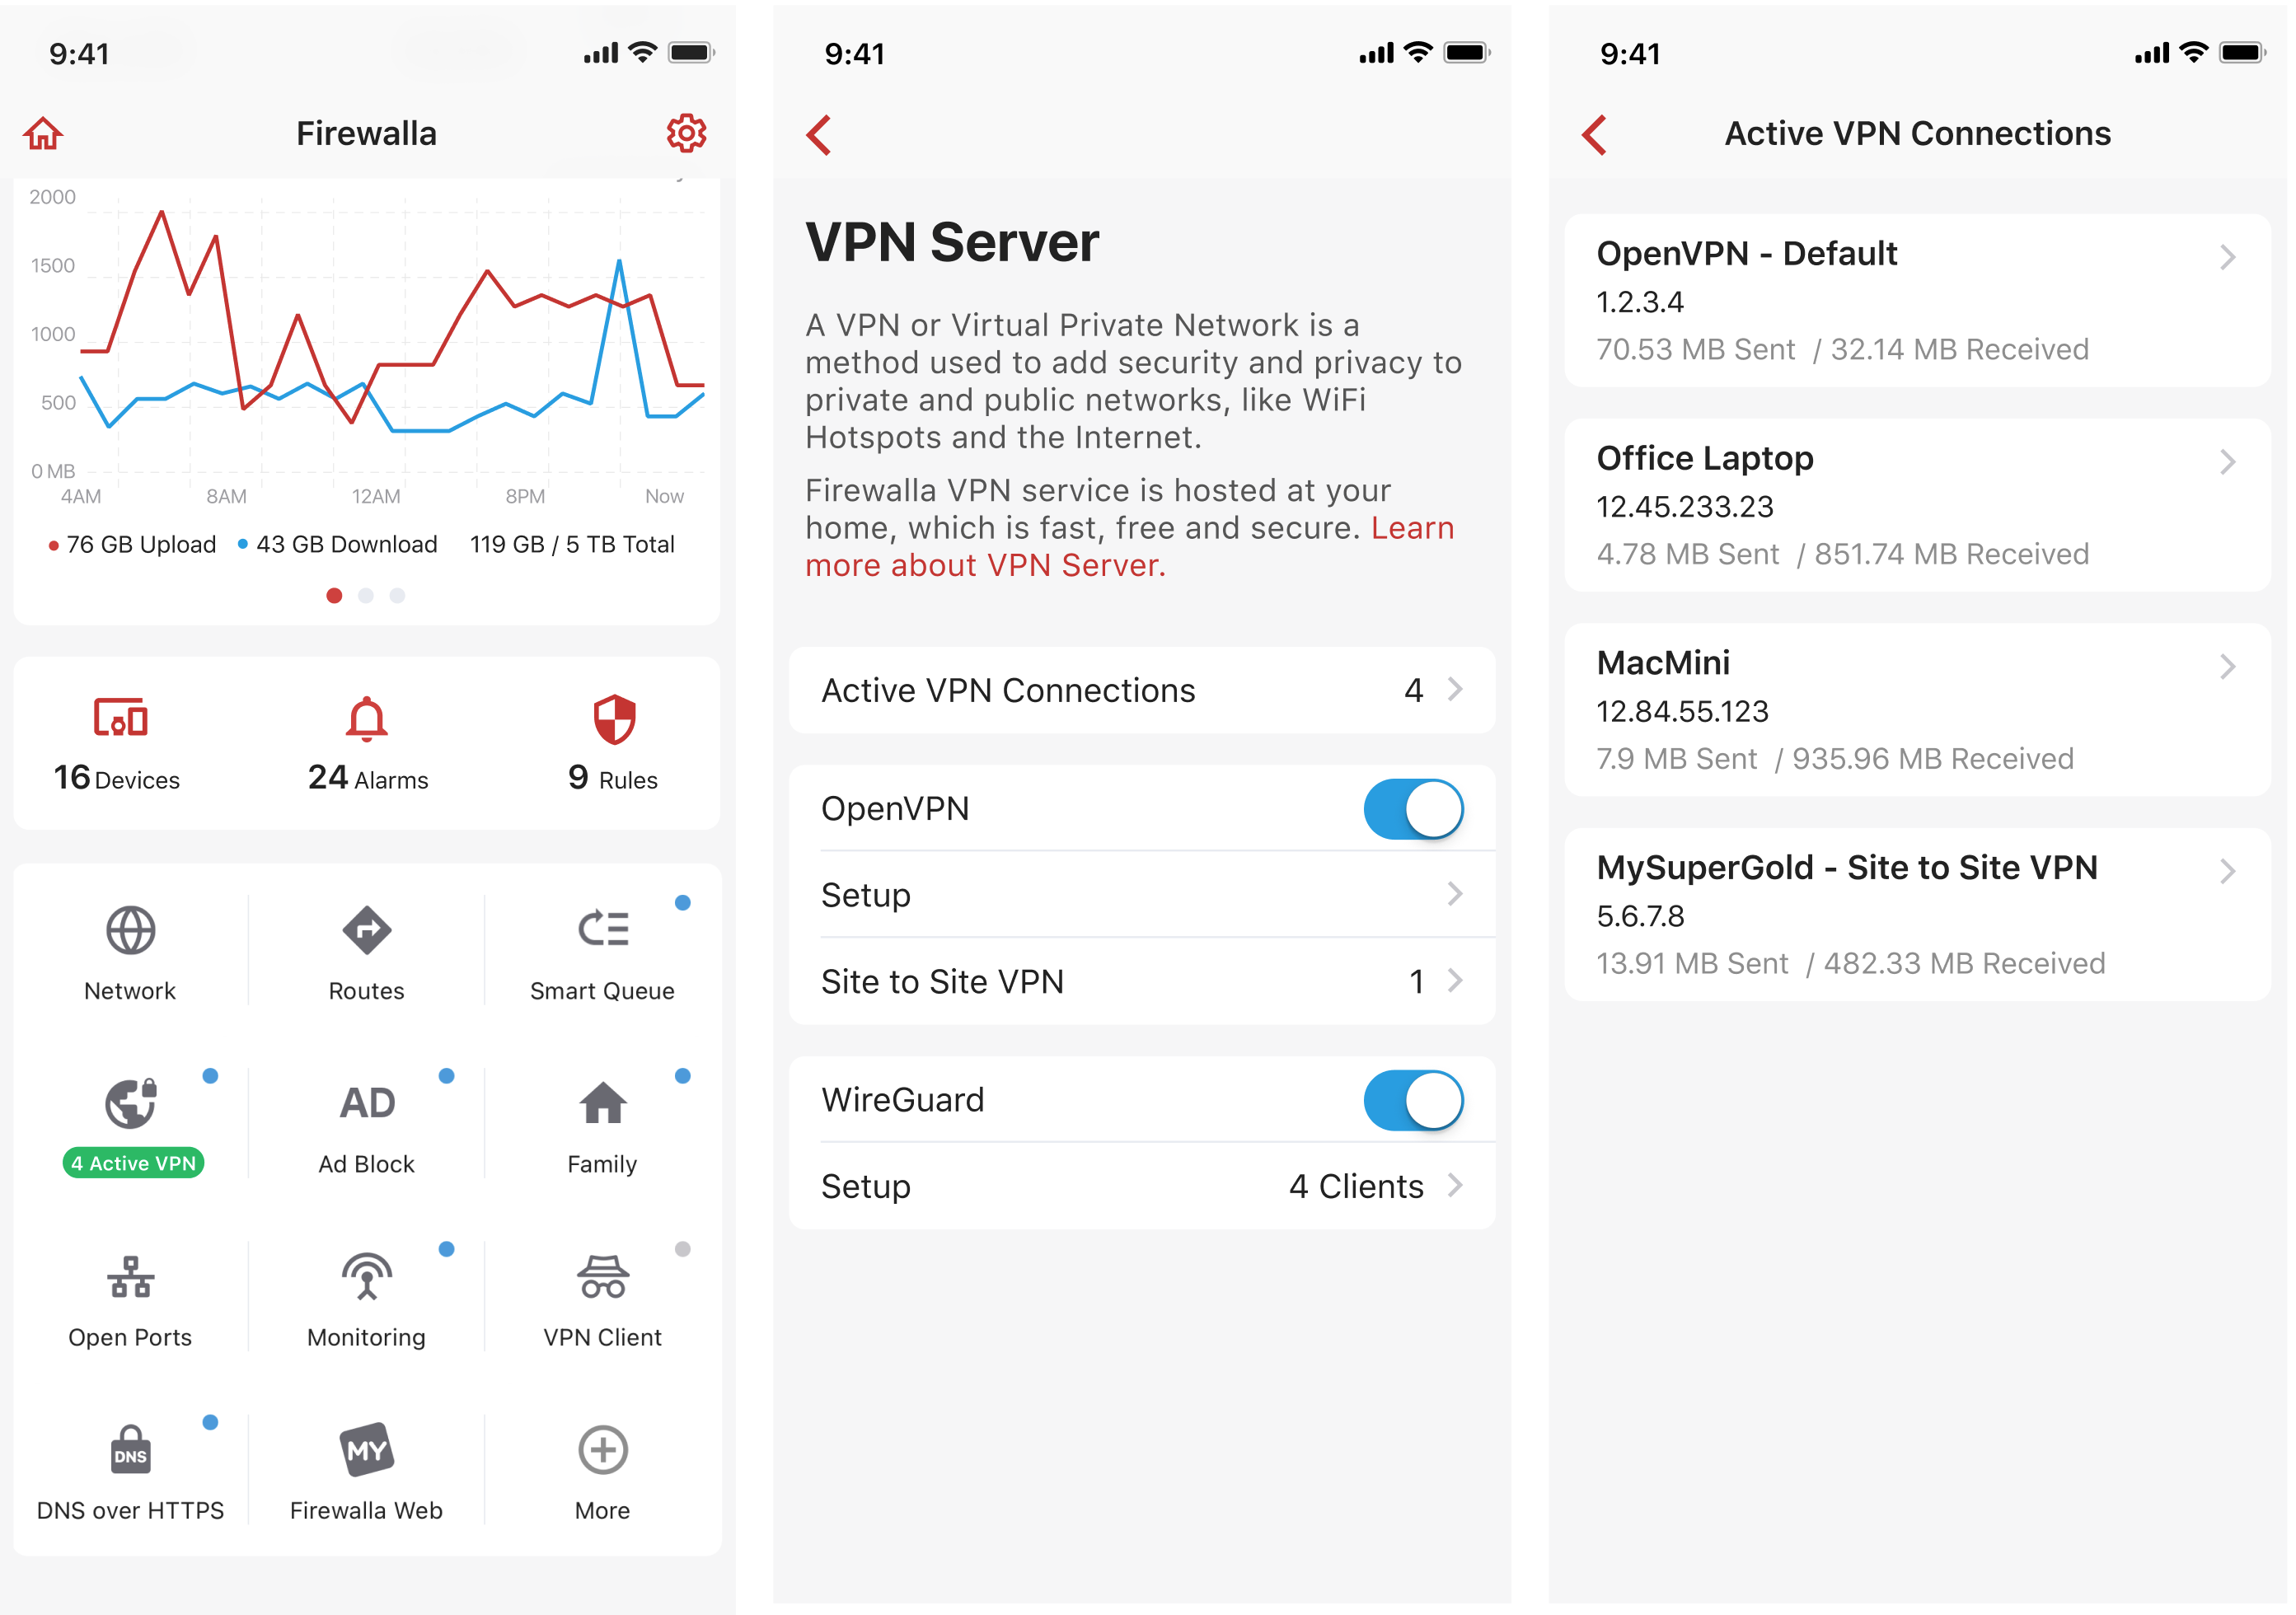 Firewalla App highlighting four active VPN connections, VPN server specifics and details for each VPN connection